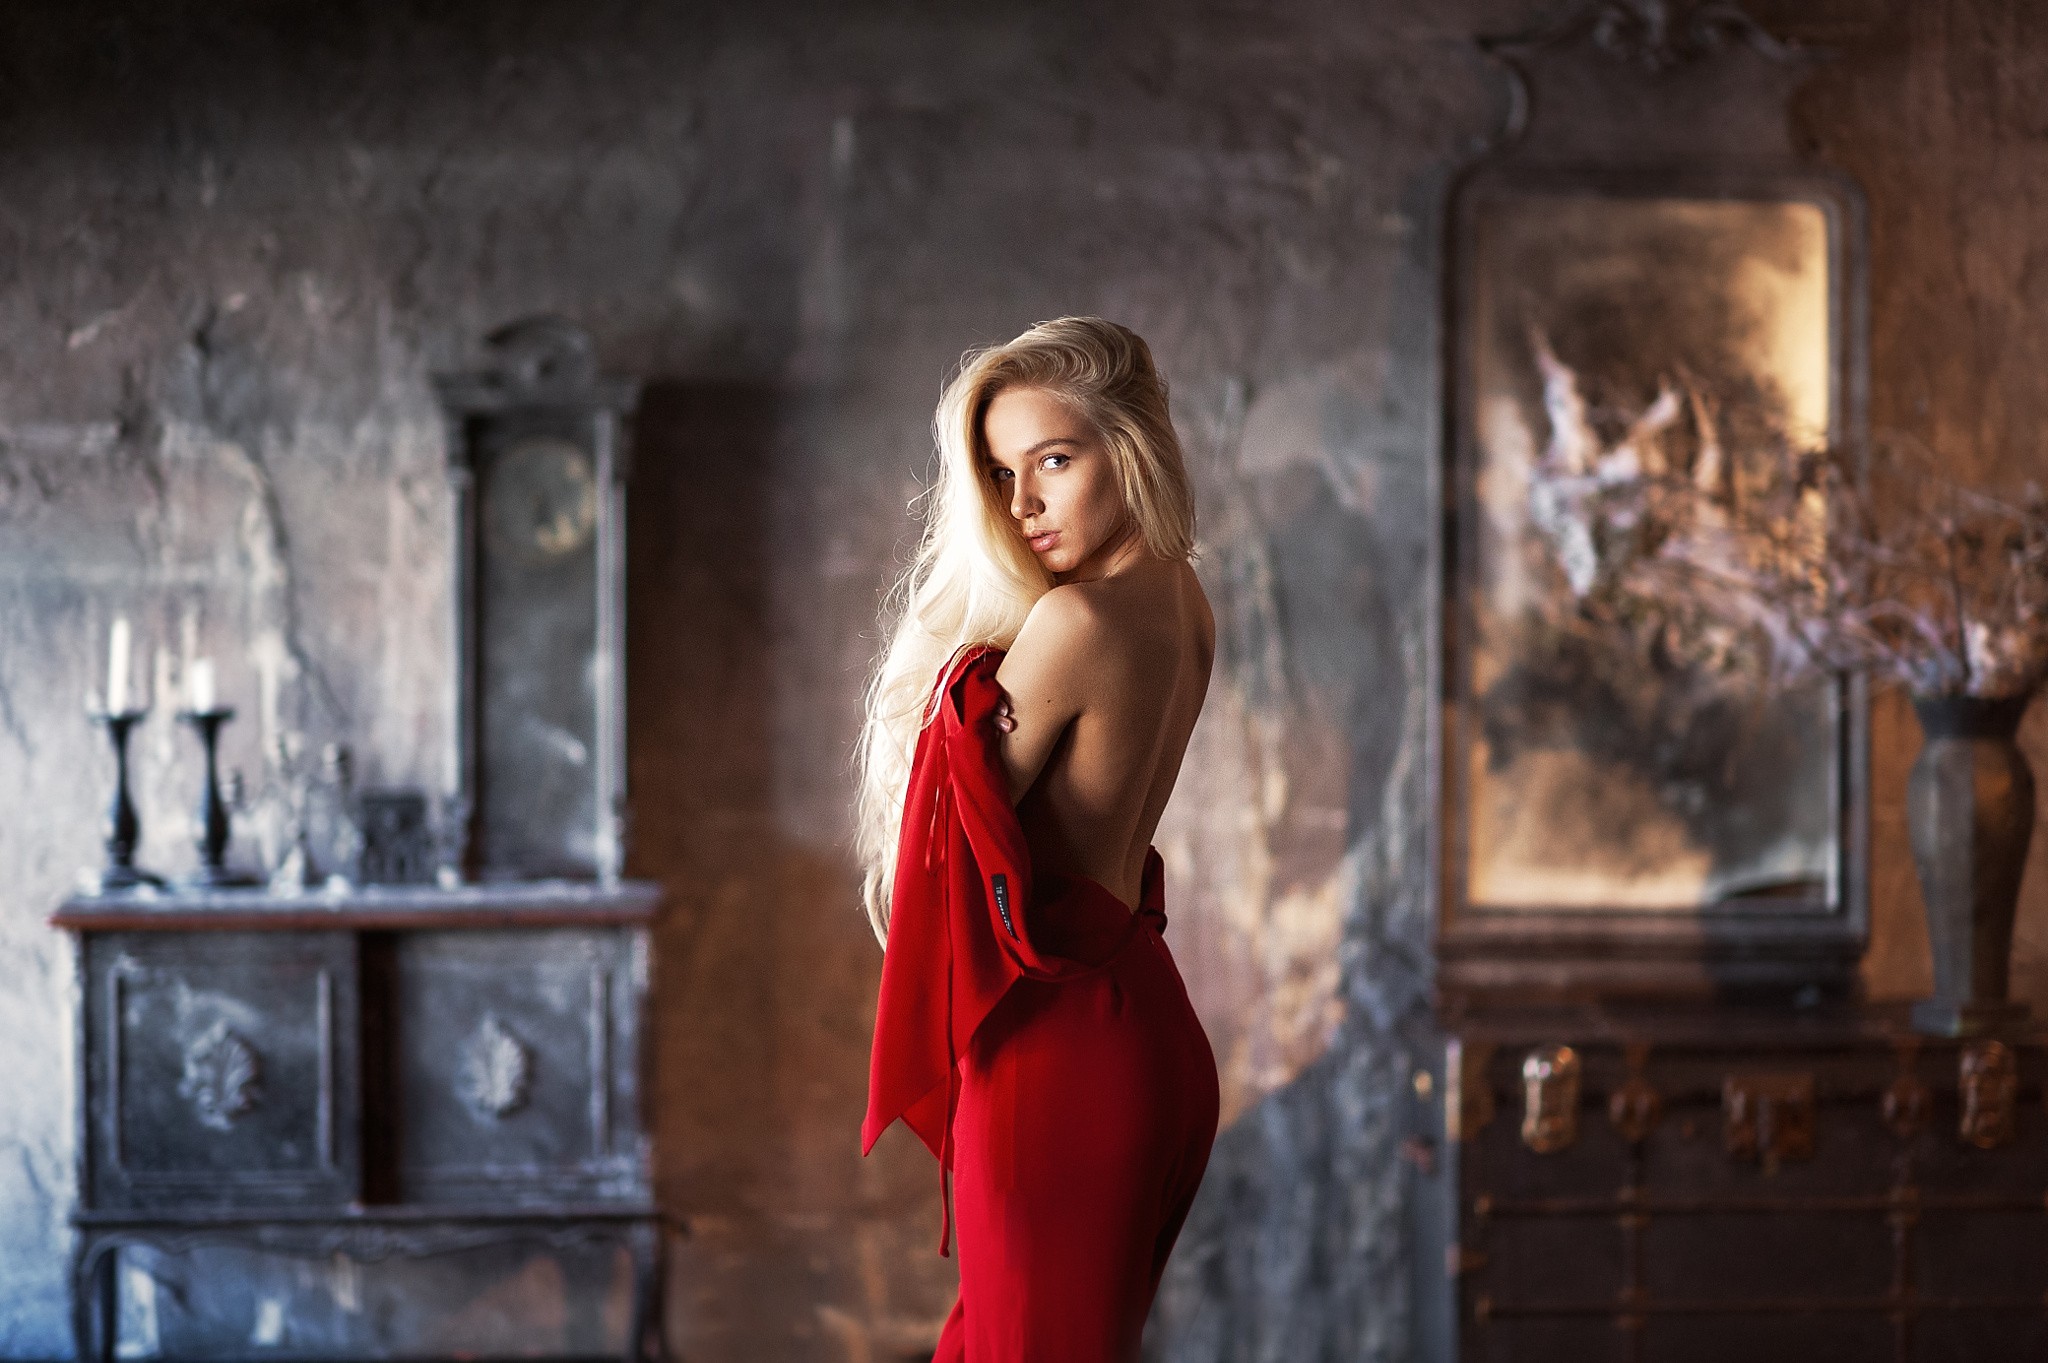 Free photo Maria Popova in a red dress with a bare back